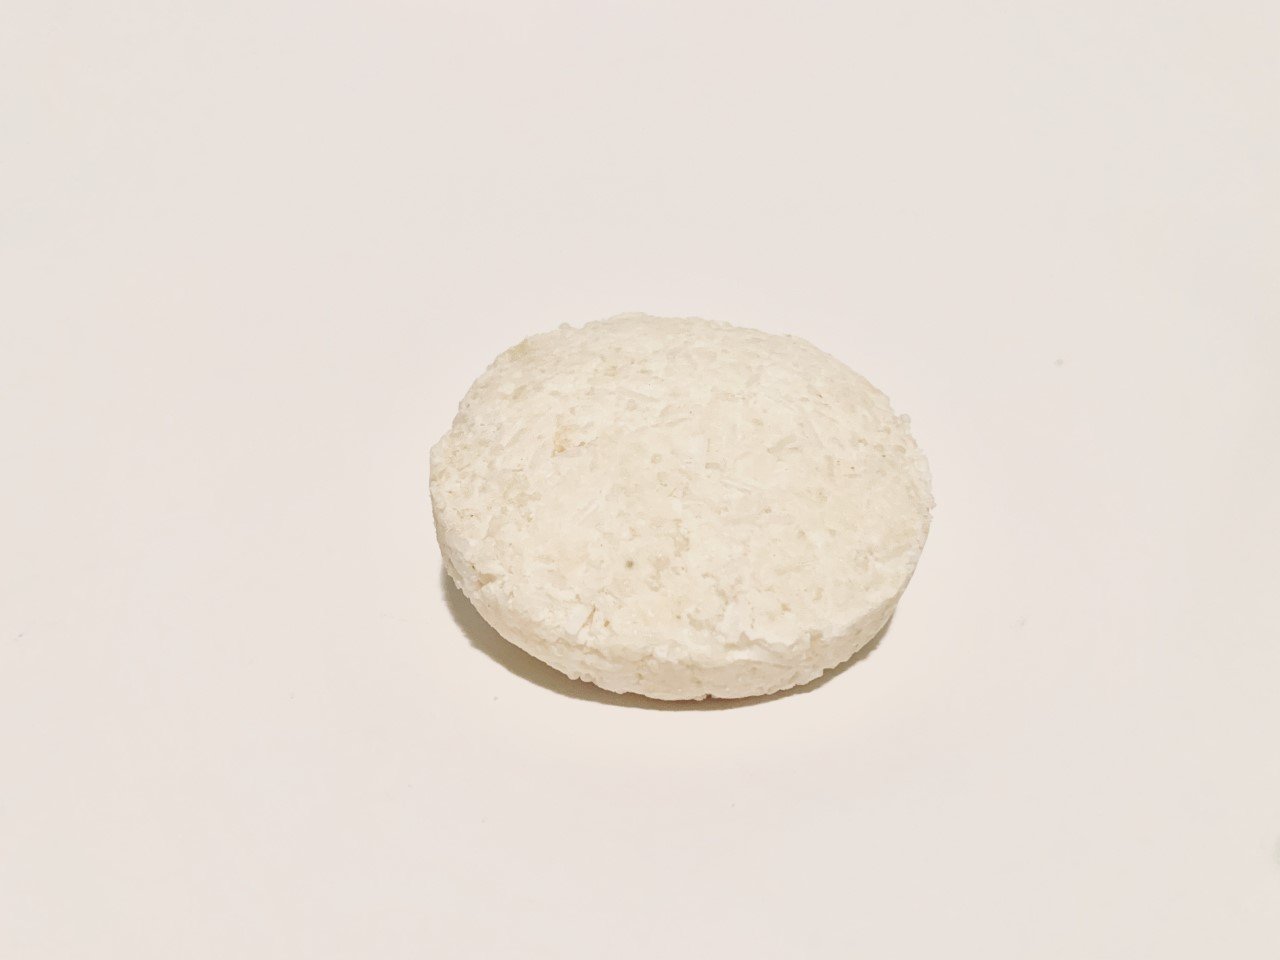 be YOU Shampoo Bar 60-65g - WHOLESALE be YOU - nelsonnaturals remineralizing toothpaste